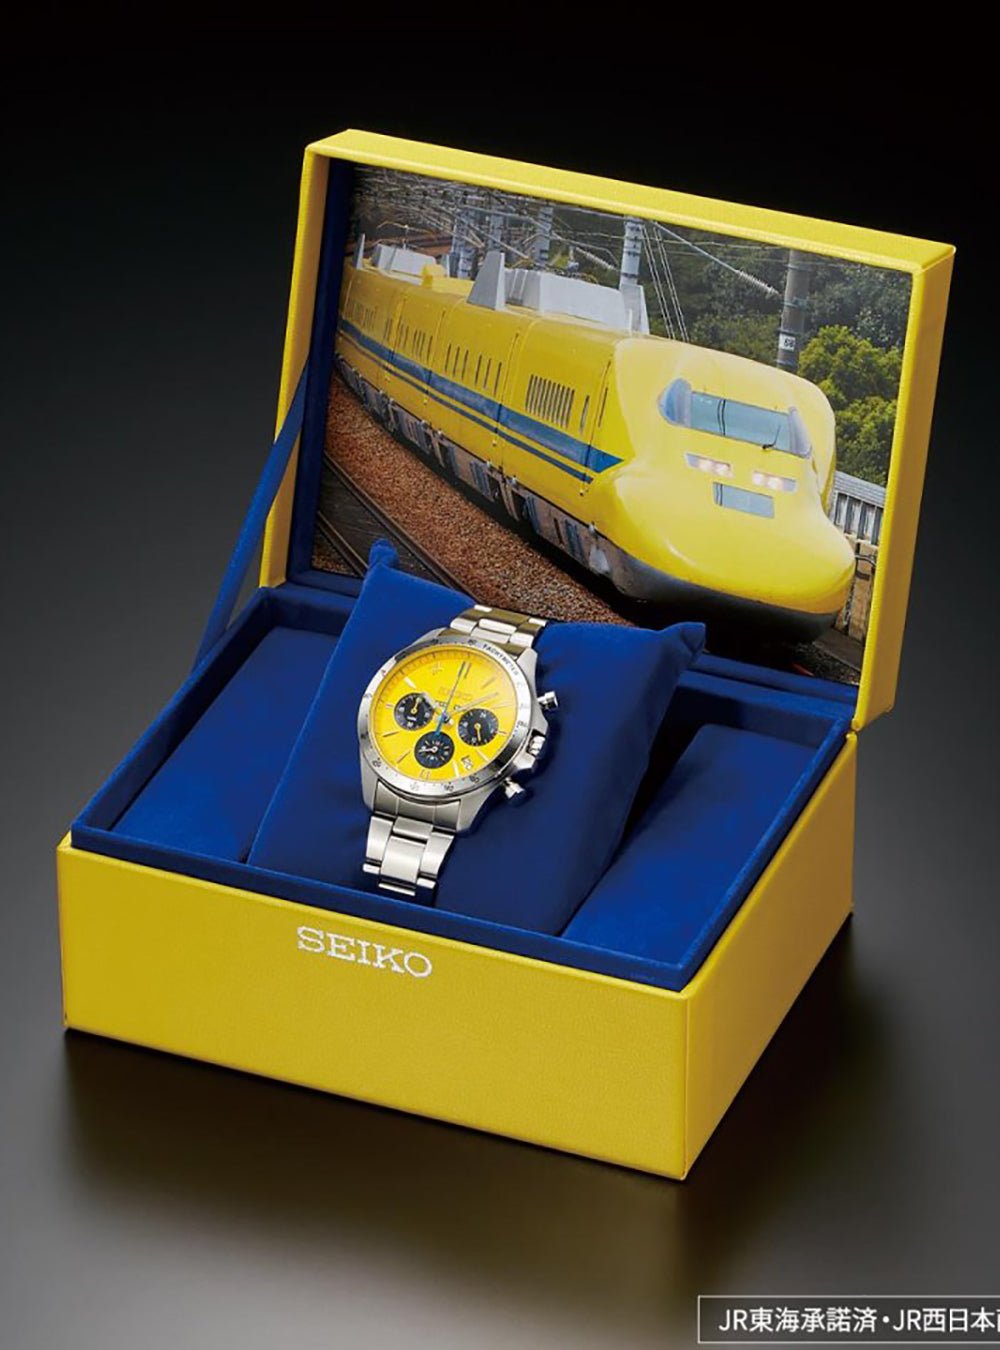 Seiko x Class 923 Doctor Yellow 20th Anniversary Limited Chronograph